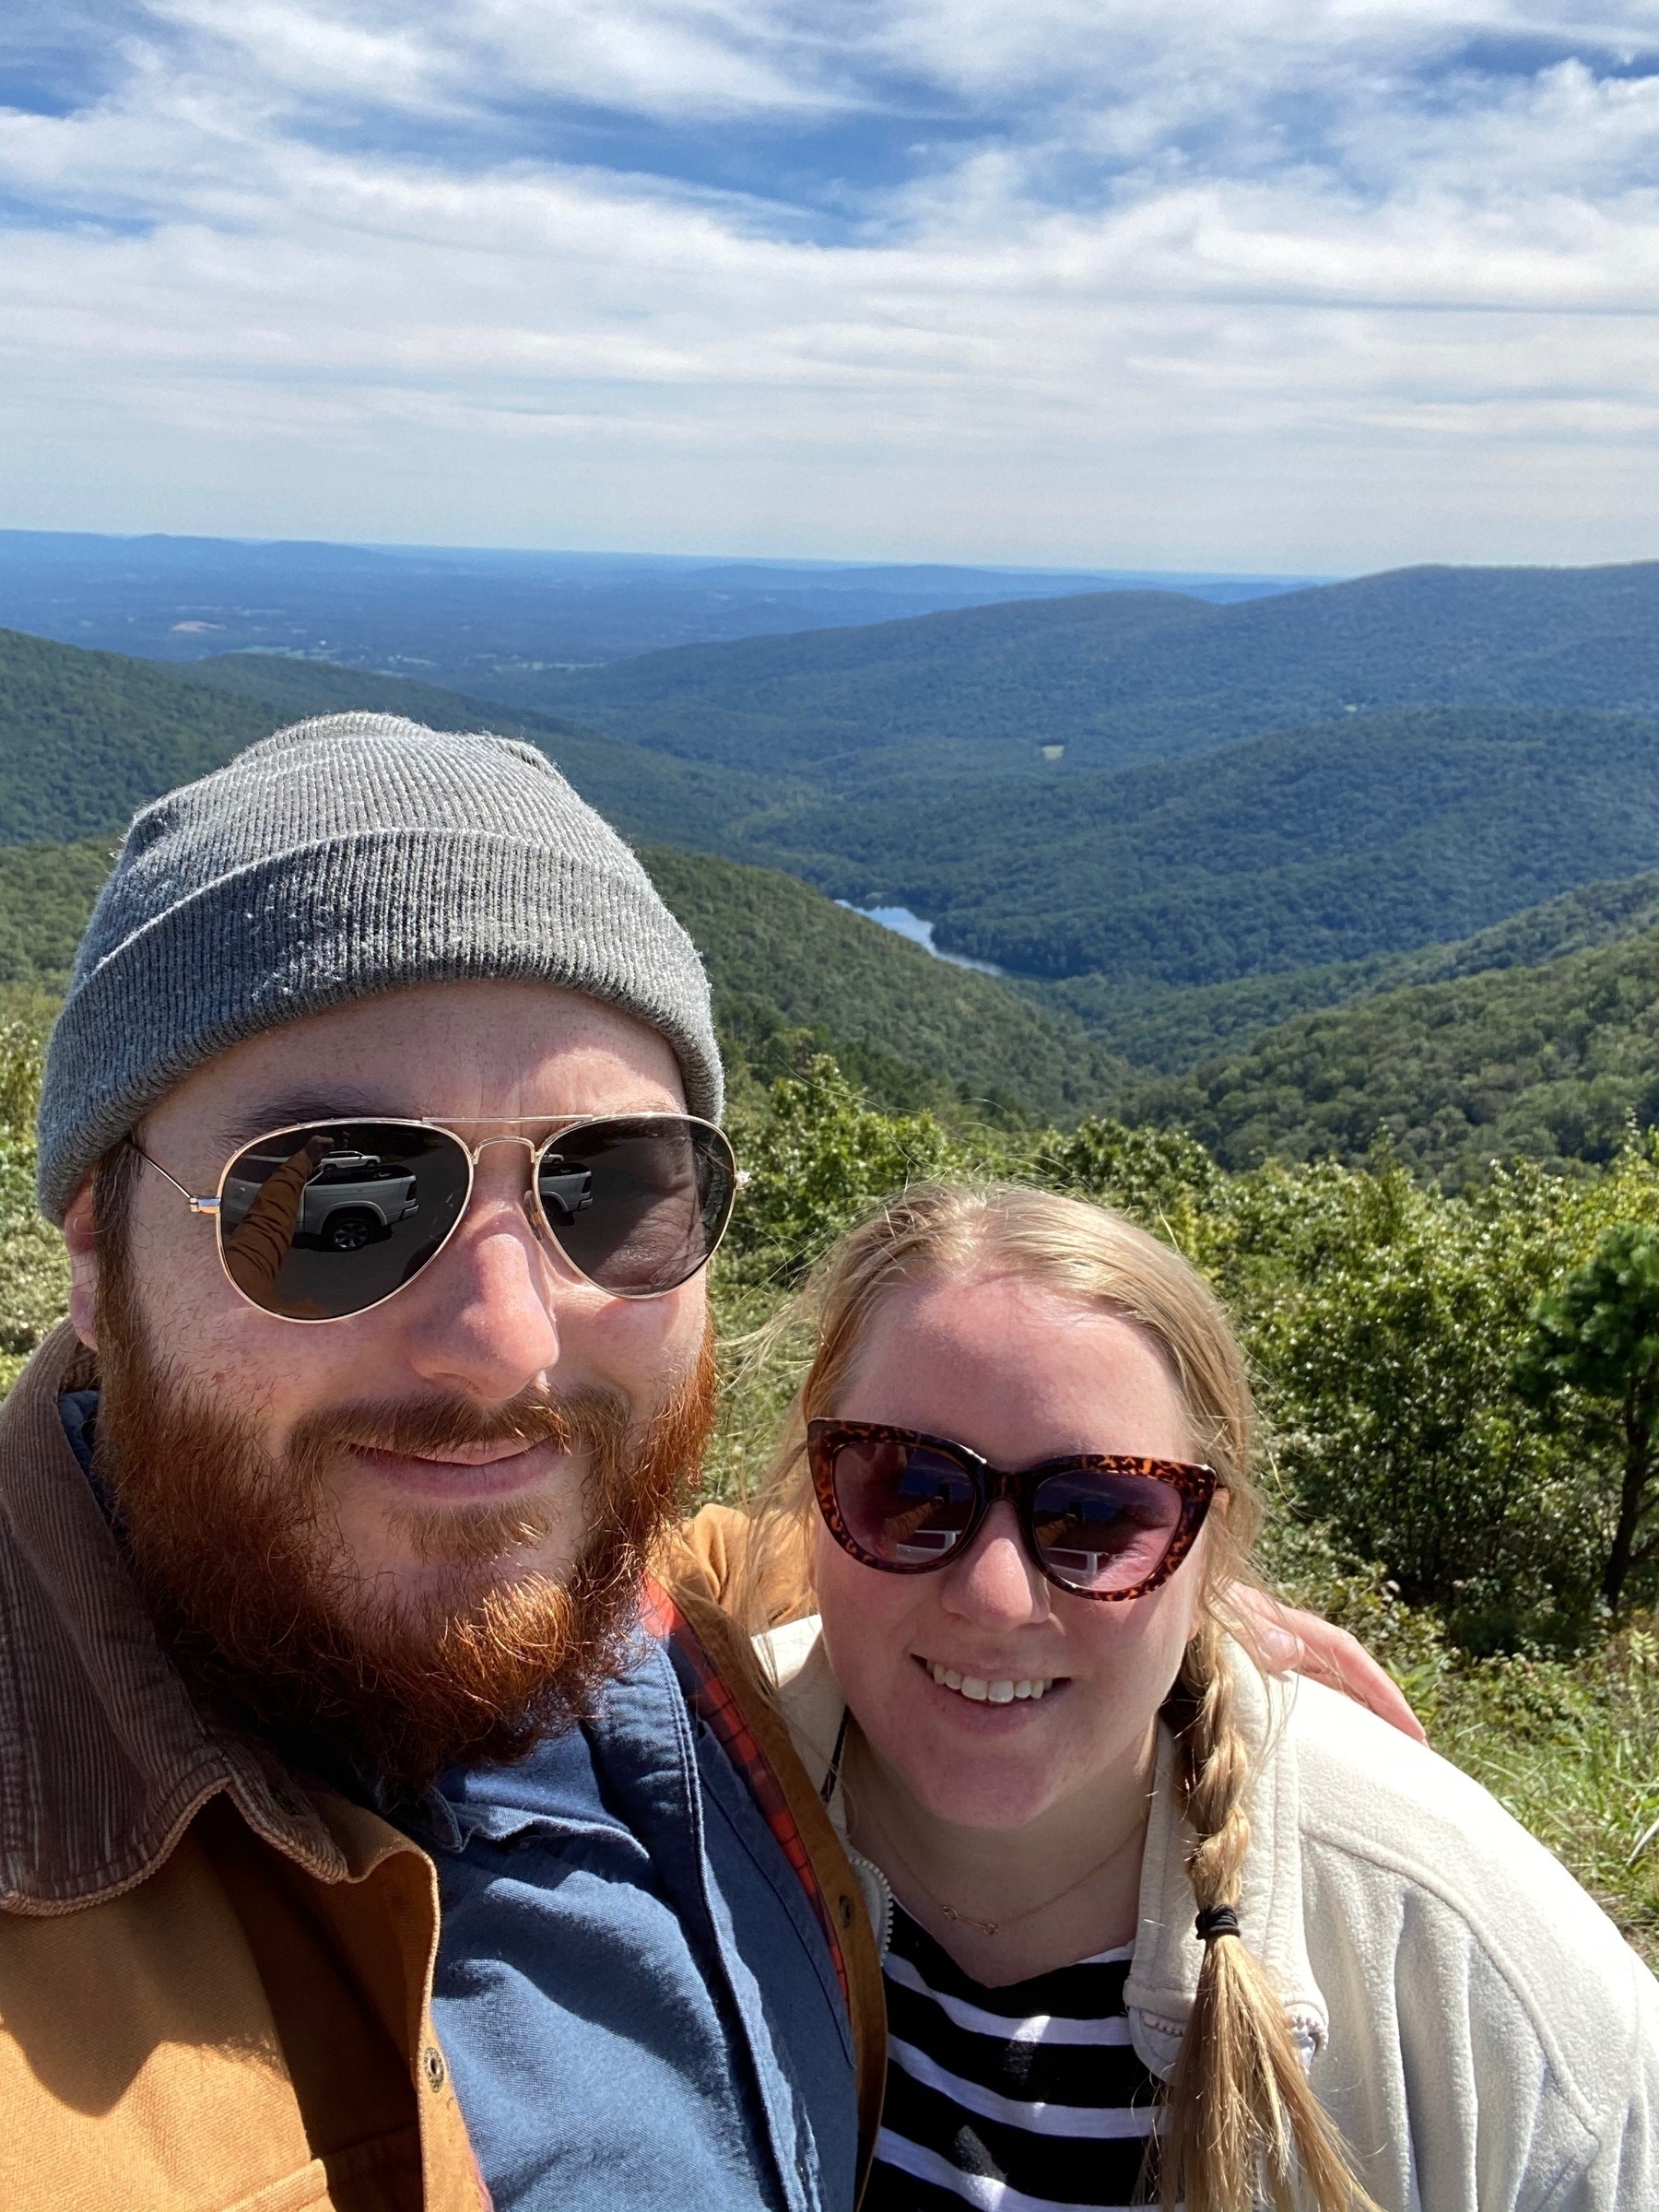 Us at the Moorman's River Overlook.